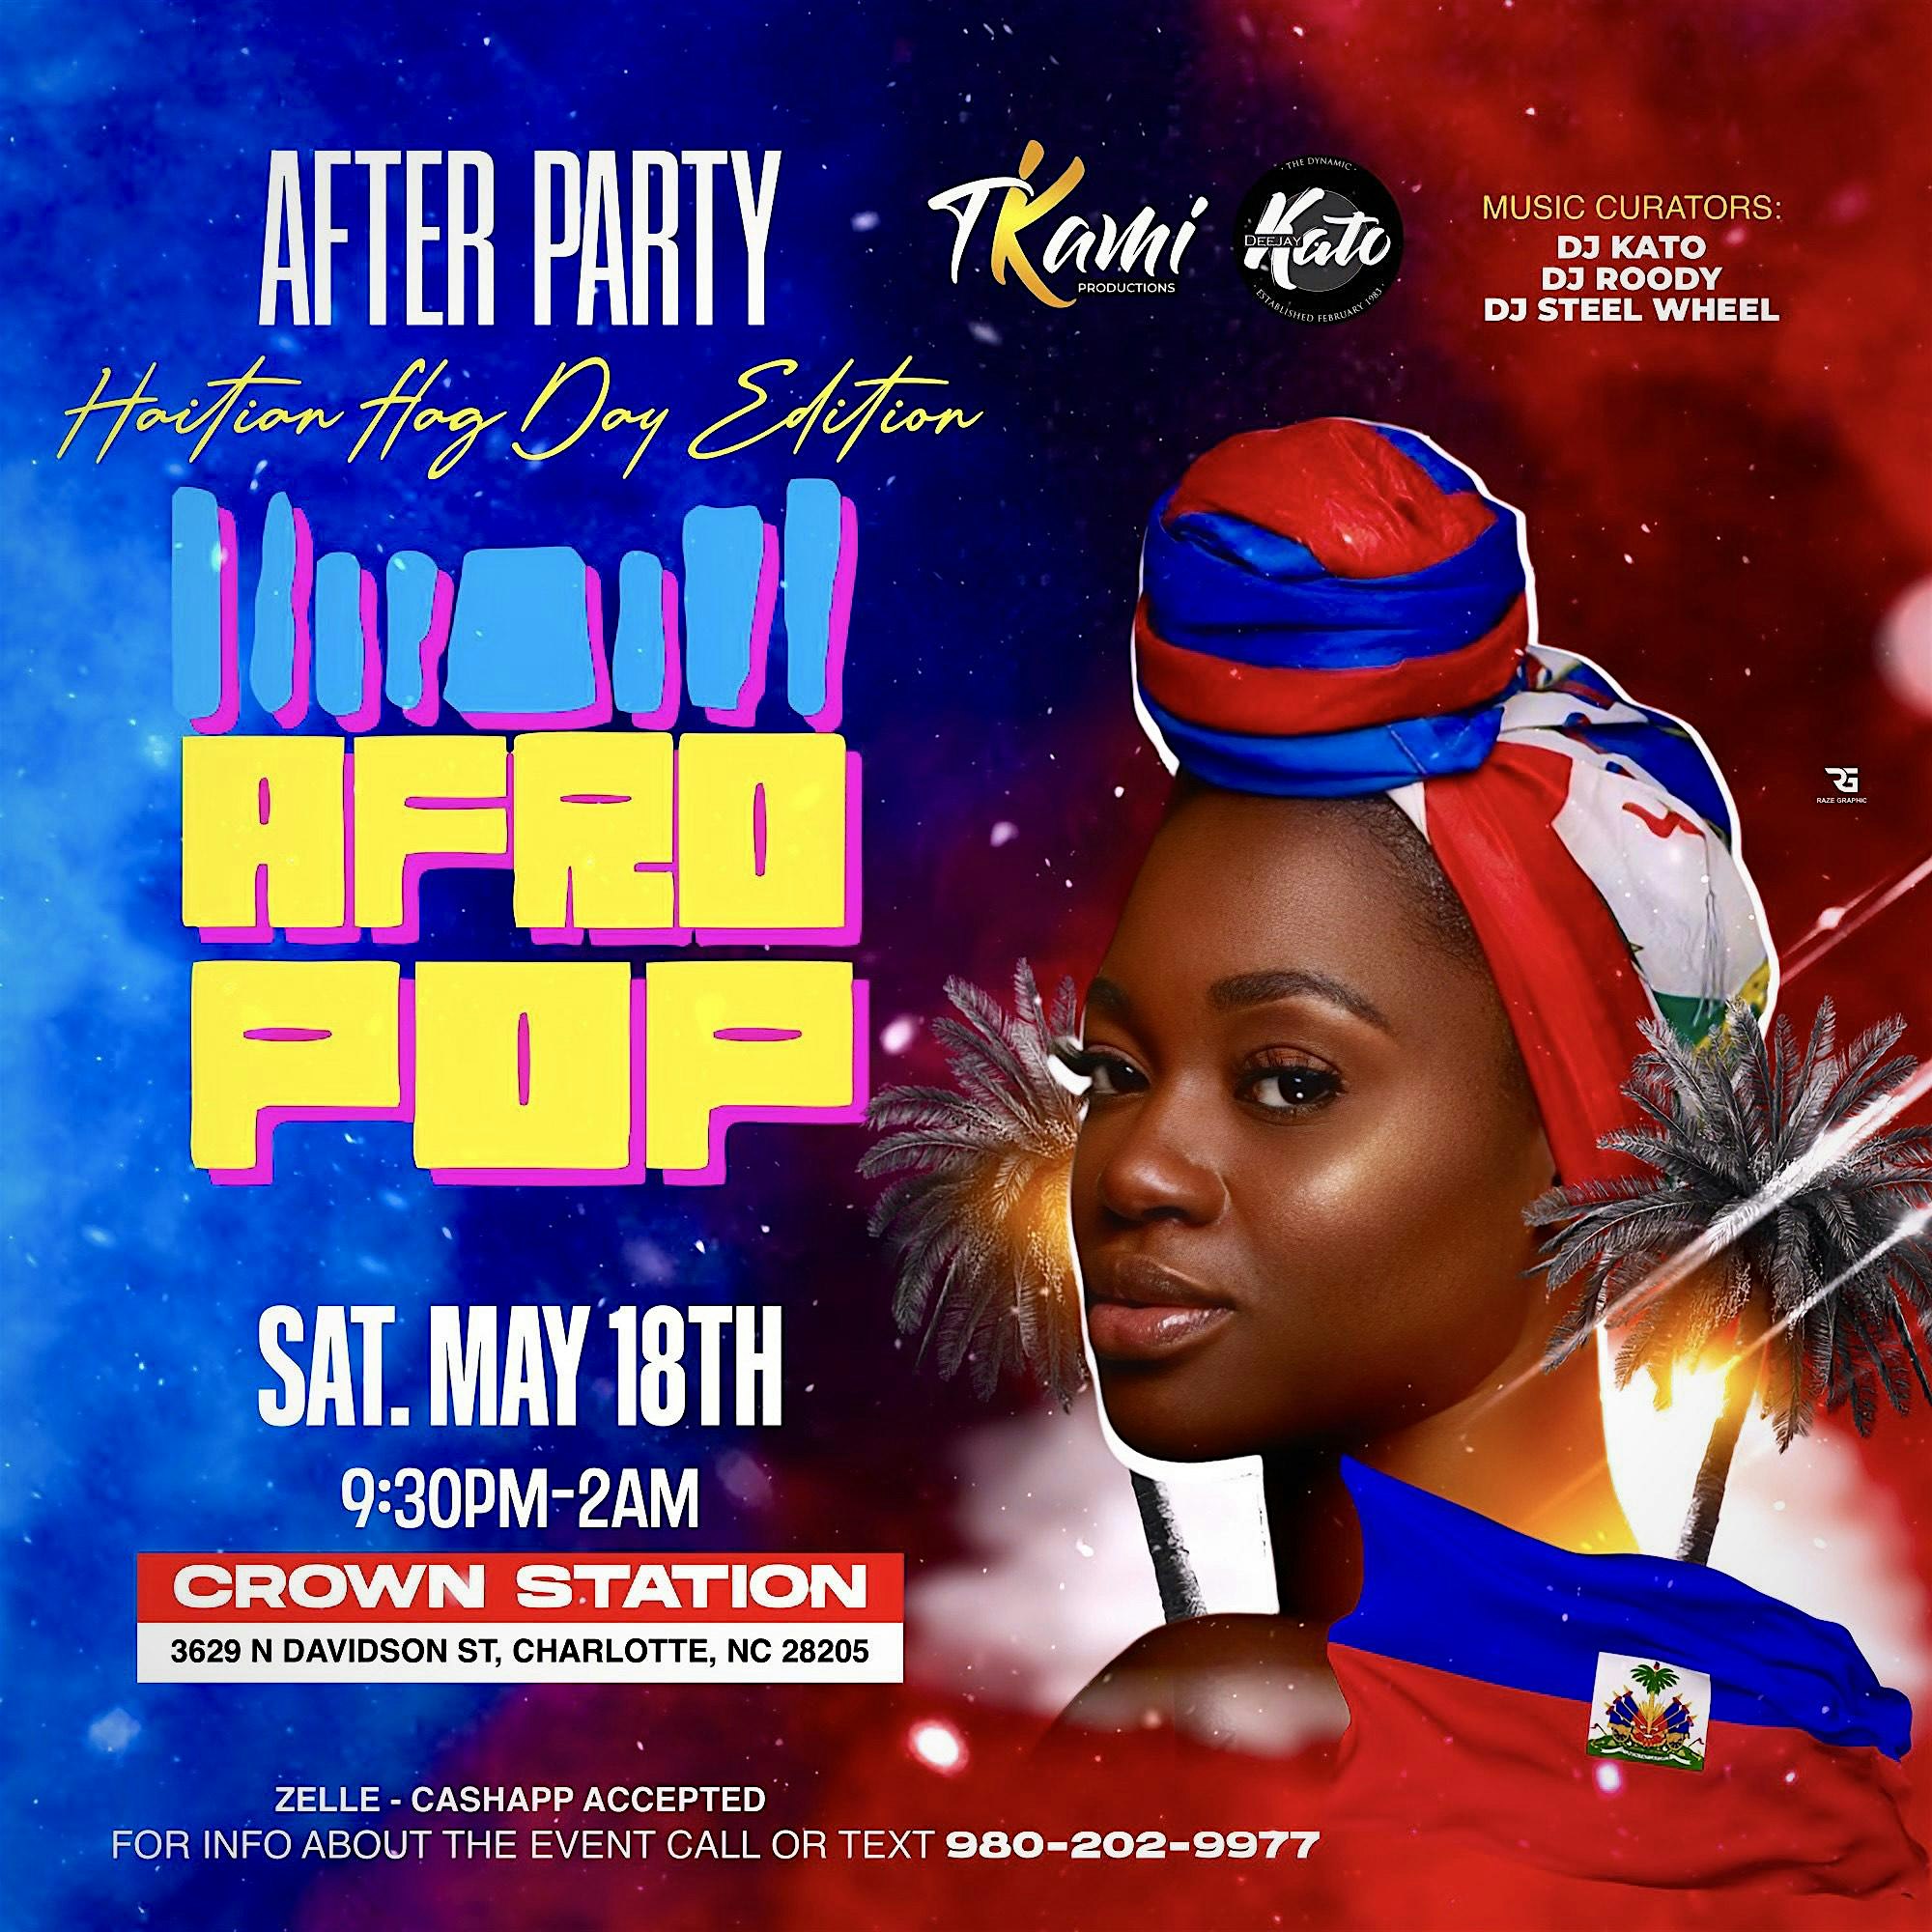 After Party Haitian Flag Day Edition